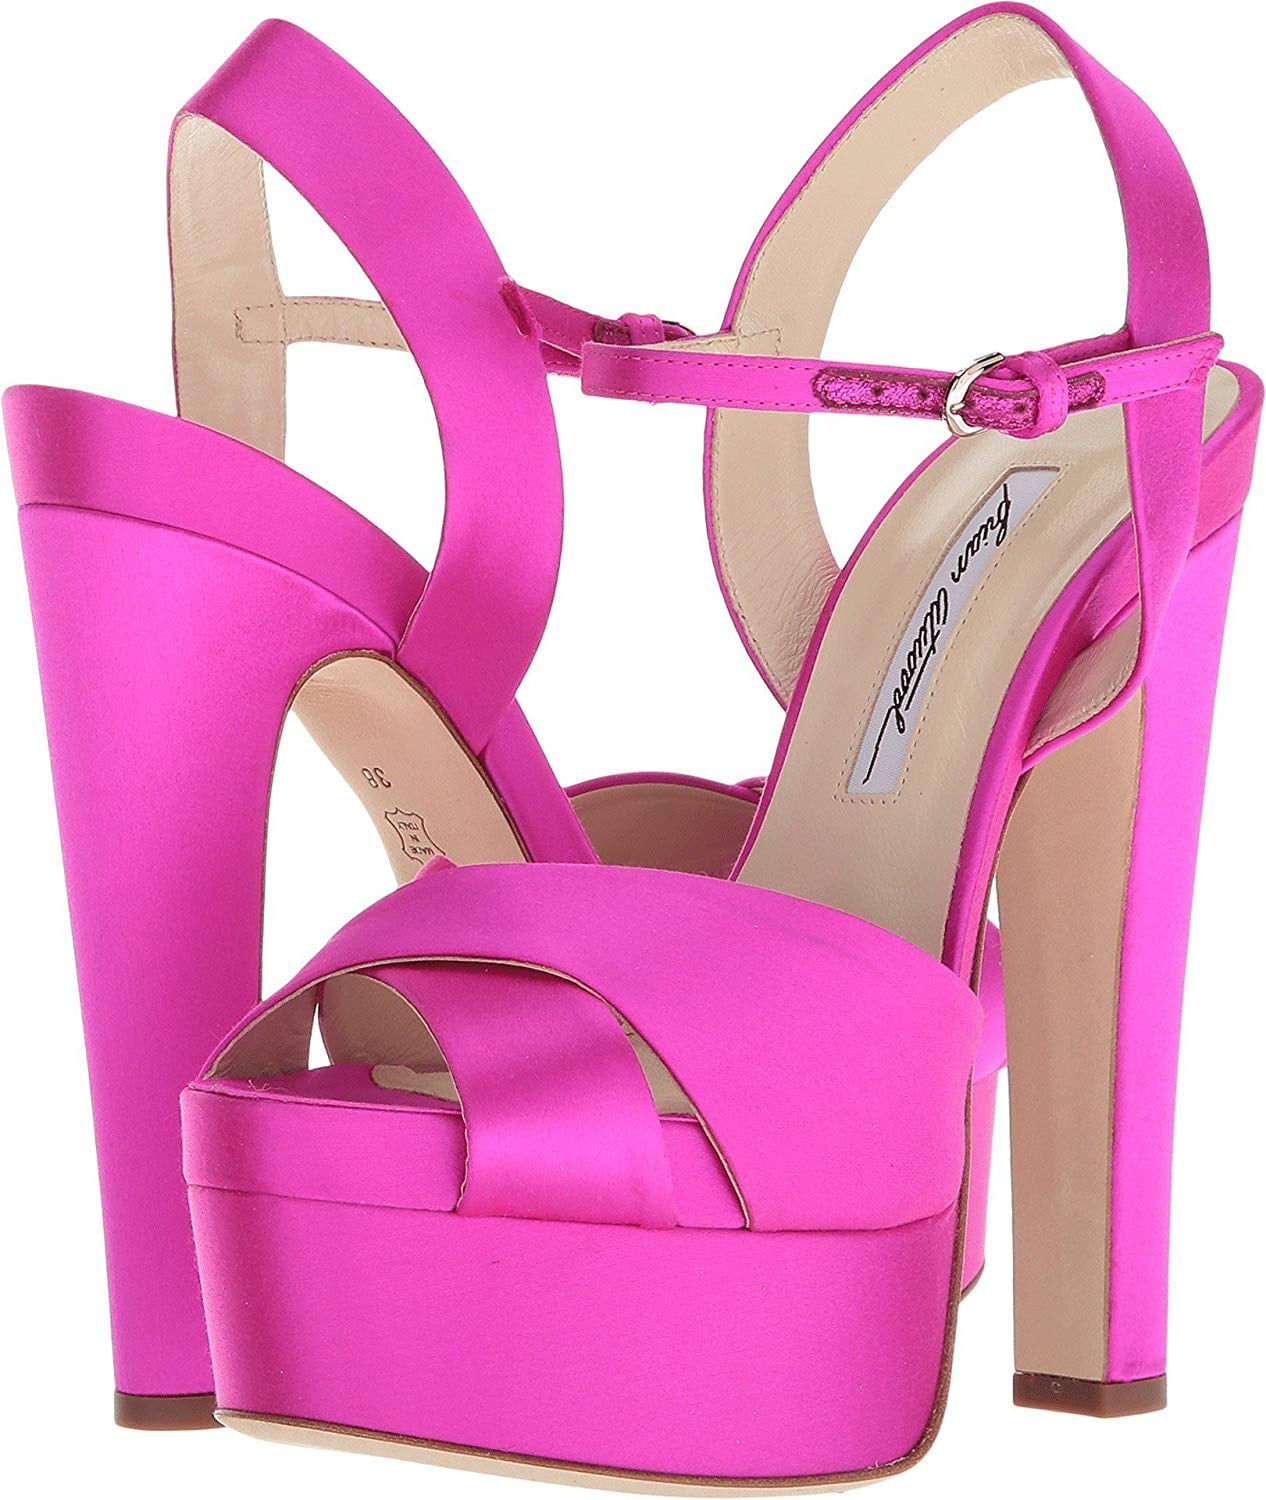 brian atwood pink heels